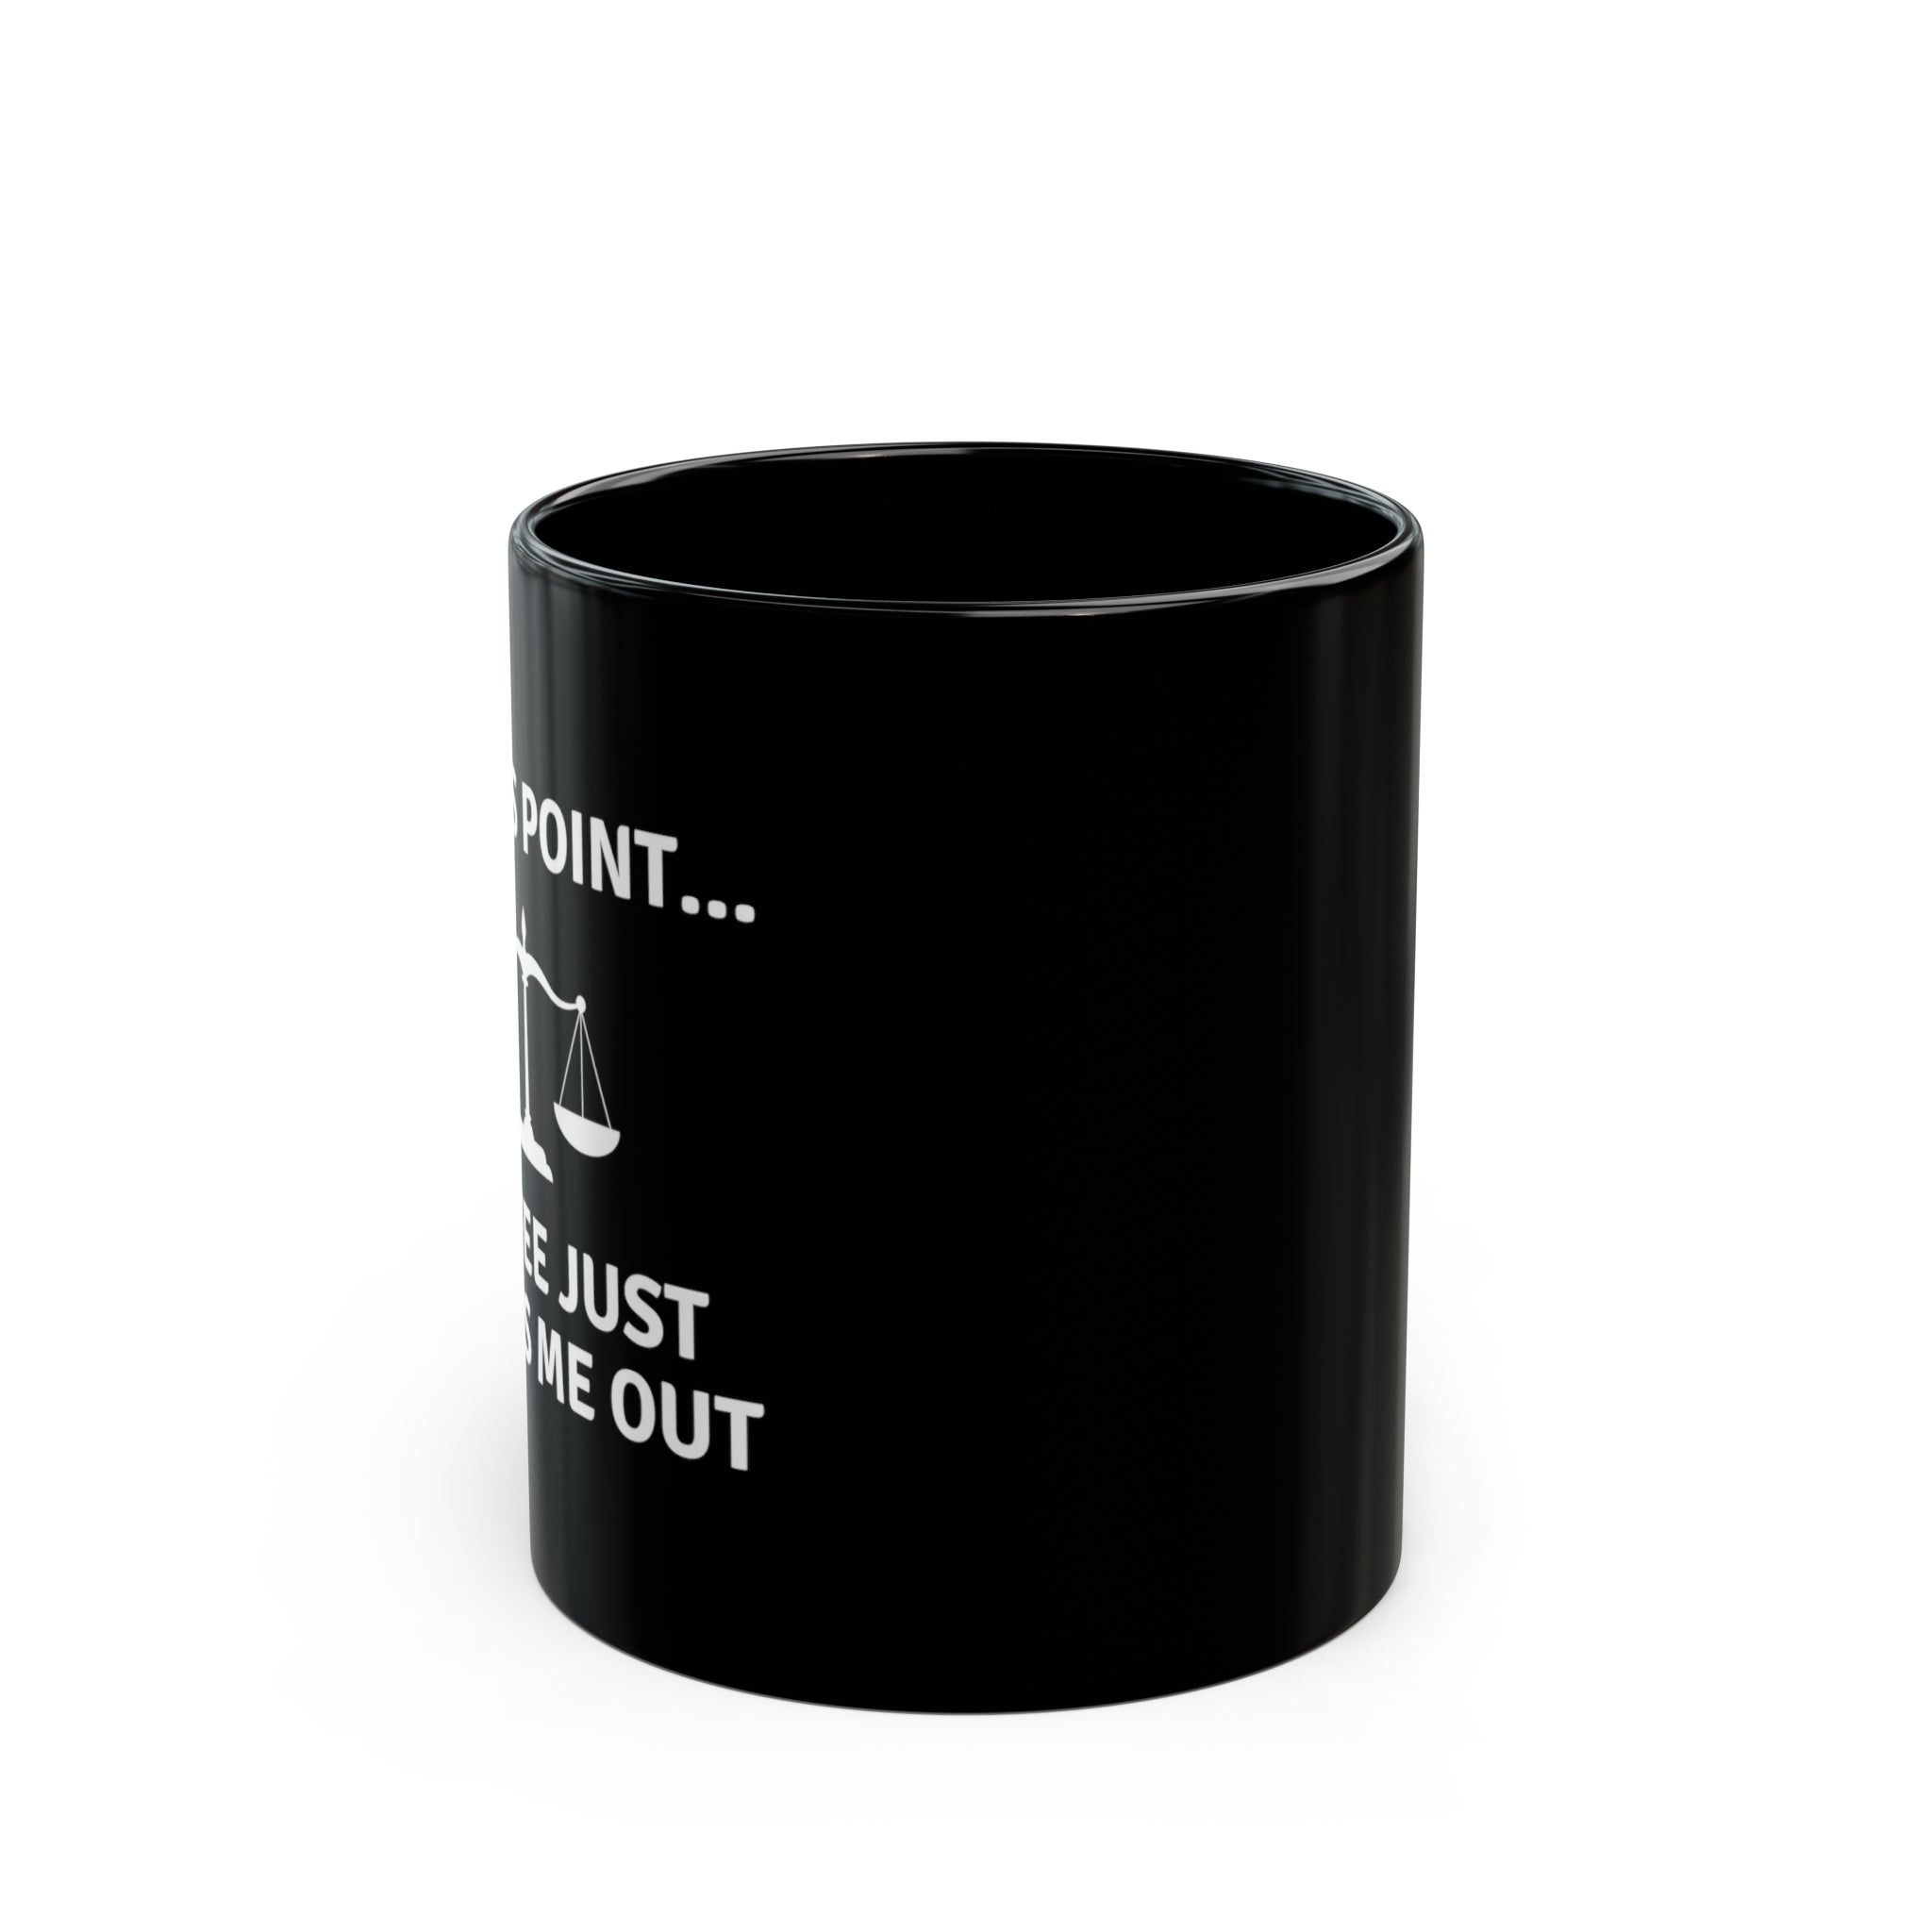 Coffee Just Levels Me Out Mug [FUNNY & HONEST]